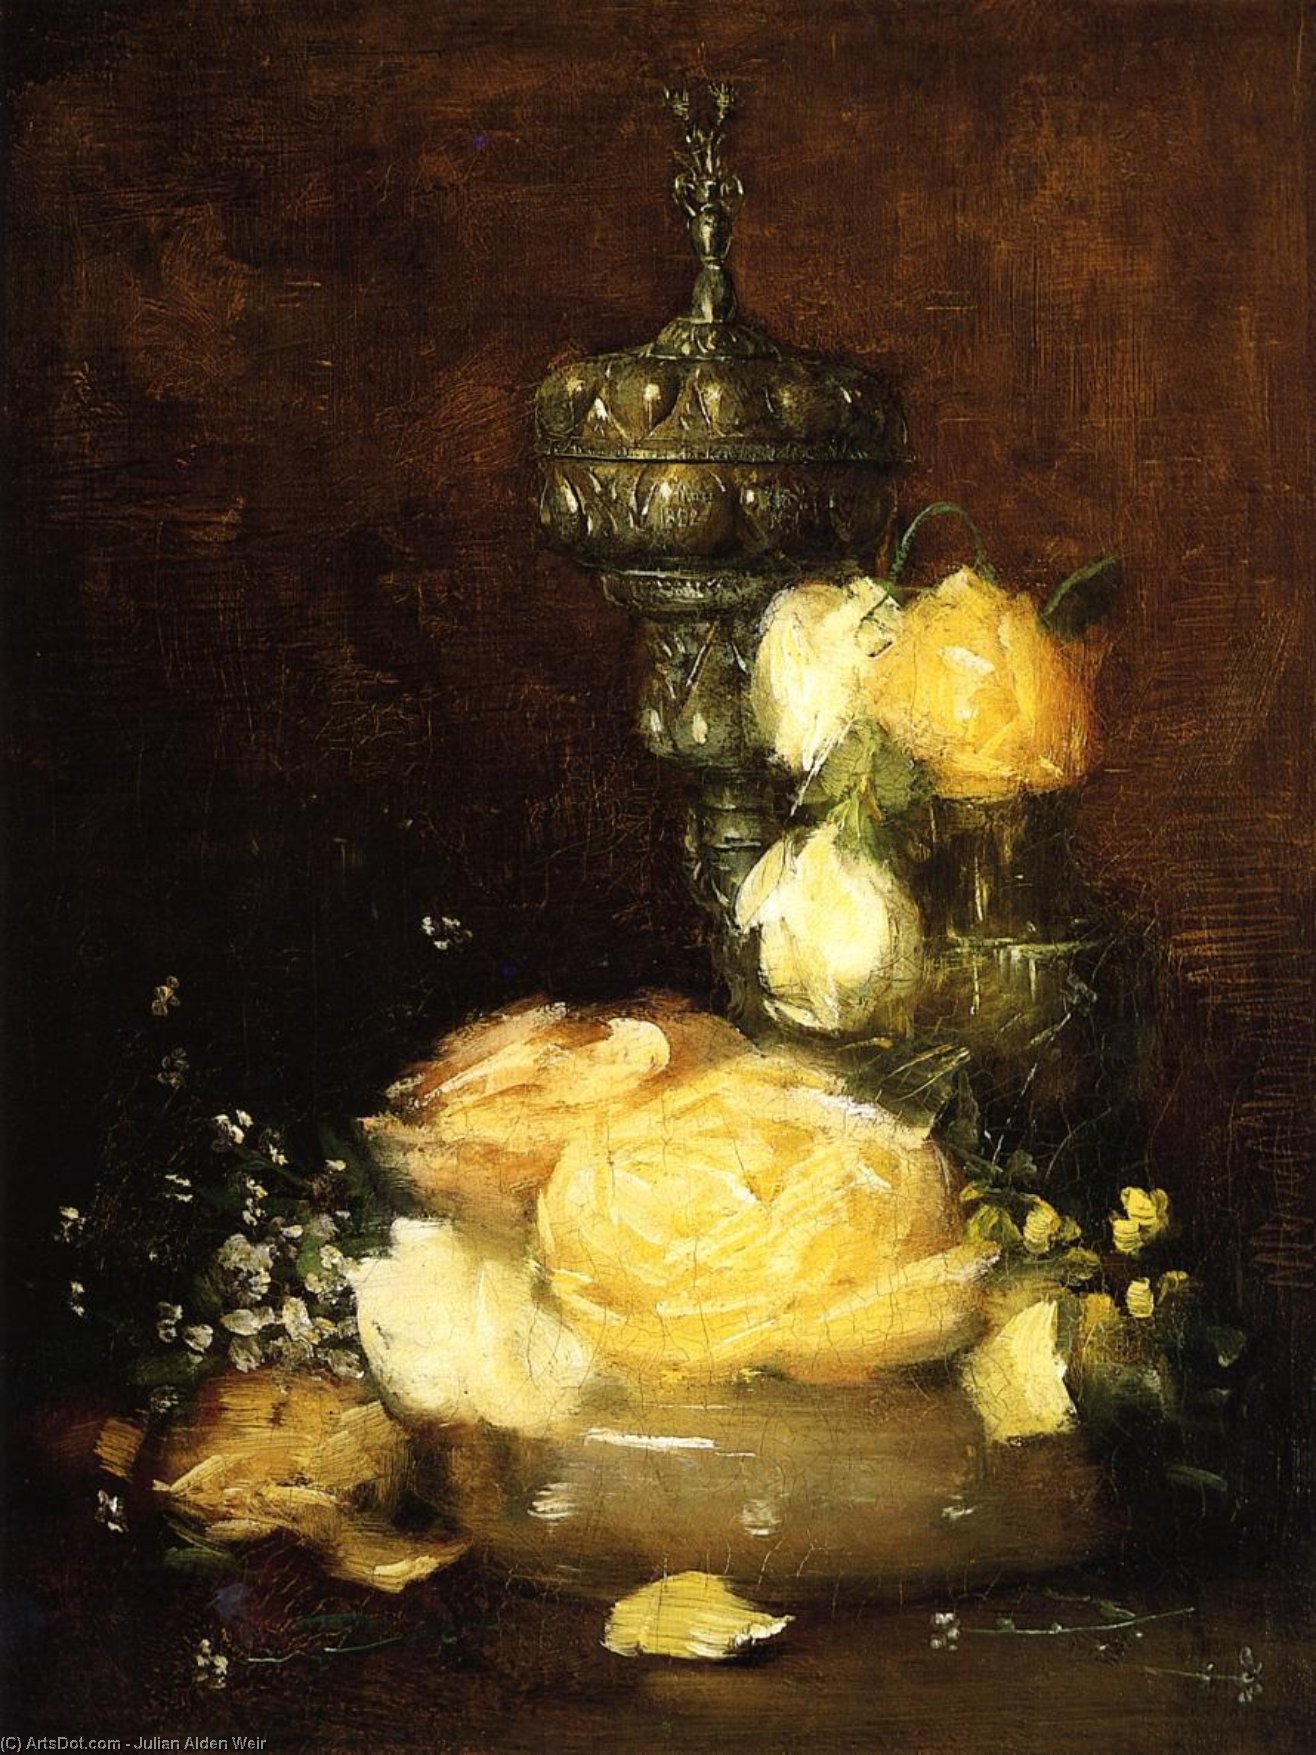 Order Paintings Reproductions Silver Chalice with Roses, 1882 by Julian Alden Weir (1852-1919, United States) | ArtsDot.com